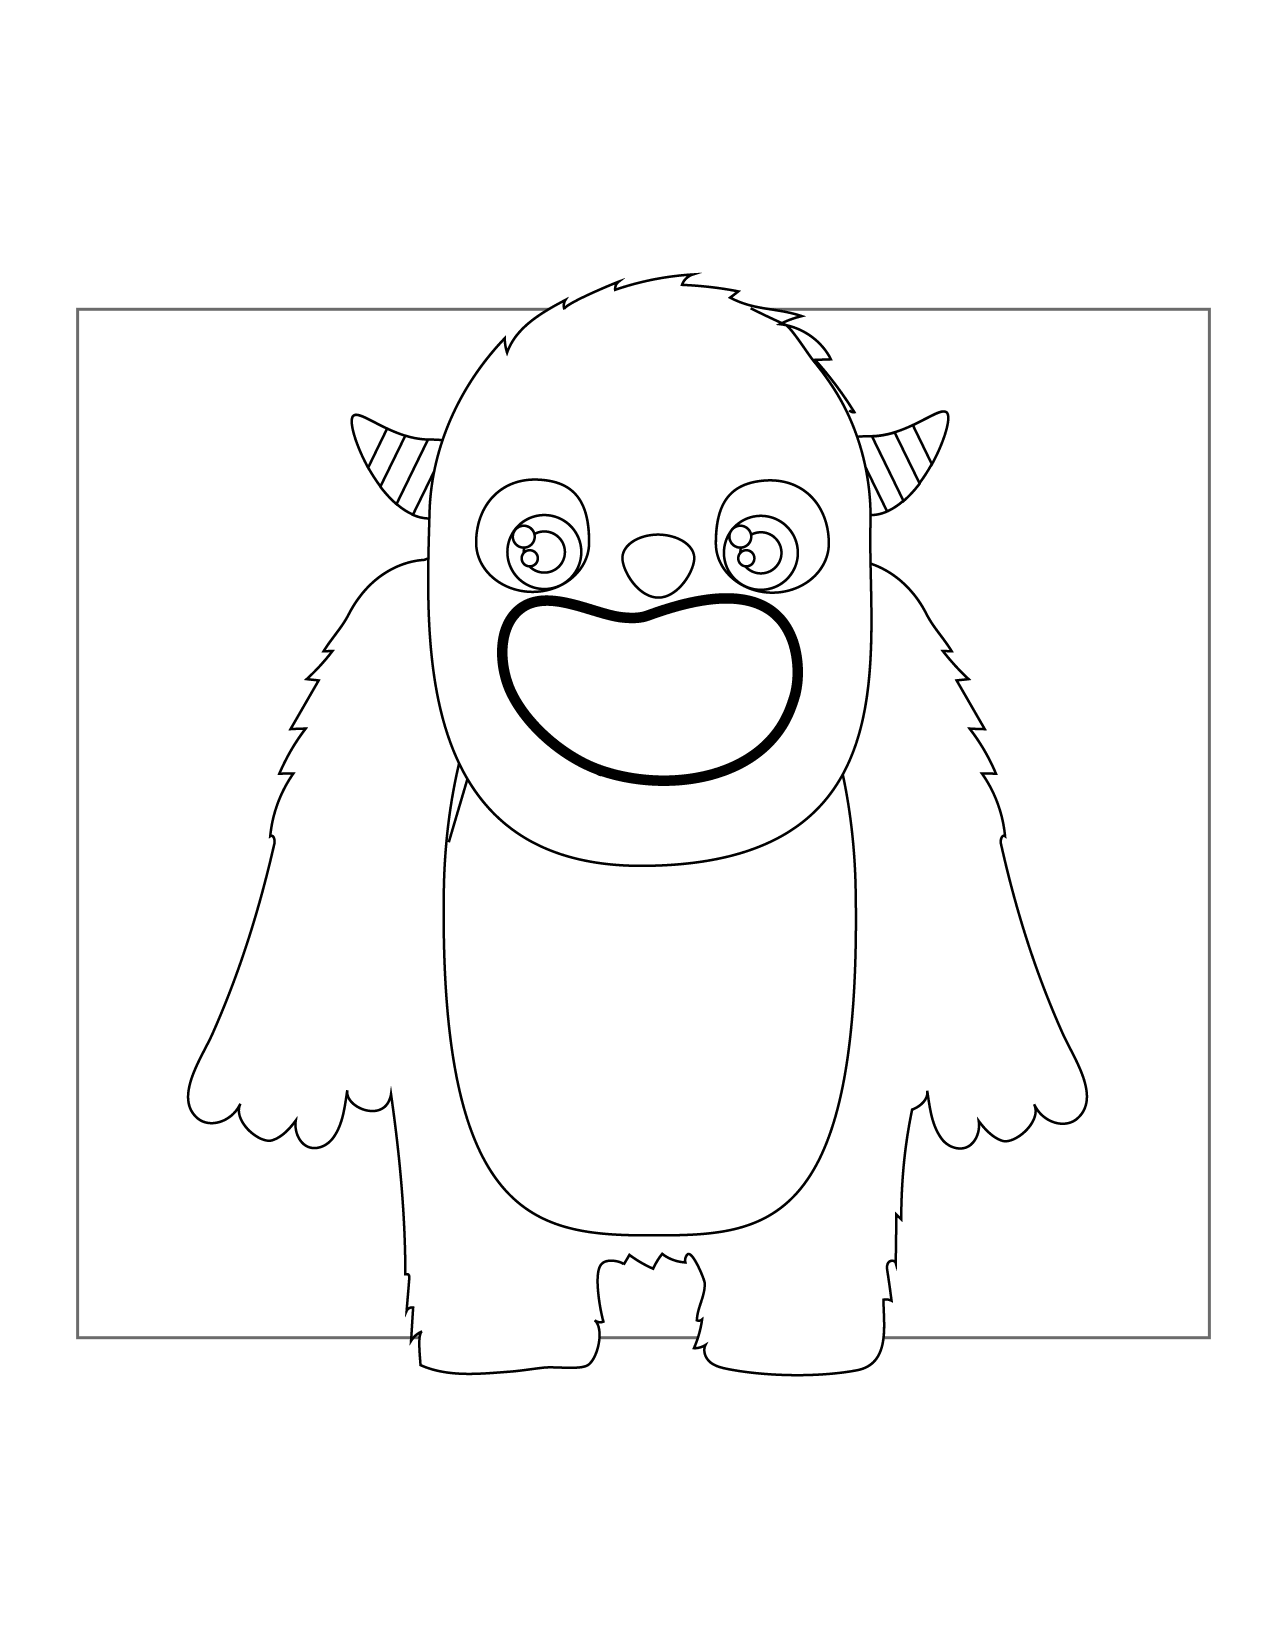 Cute Monster Coloring Page 02